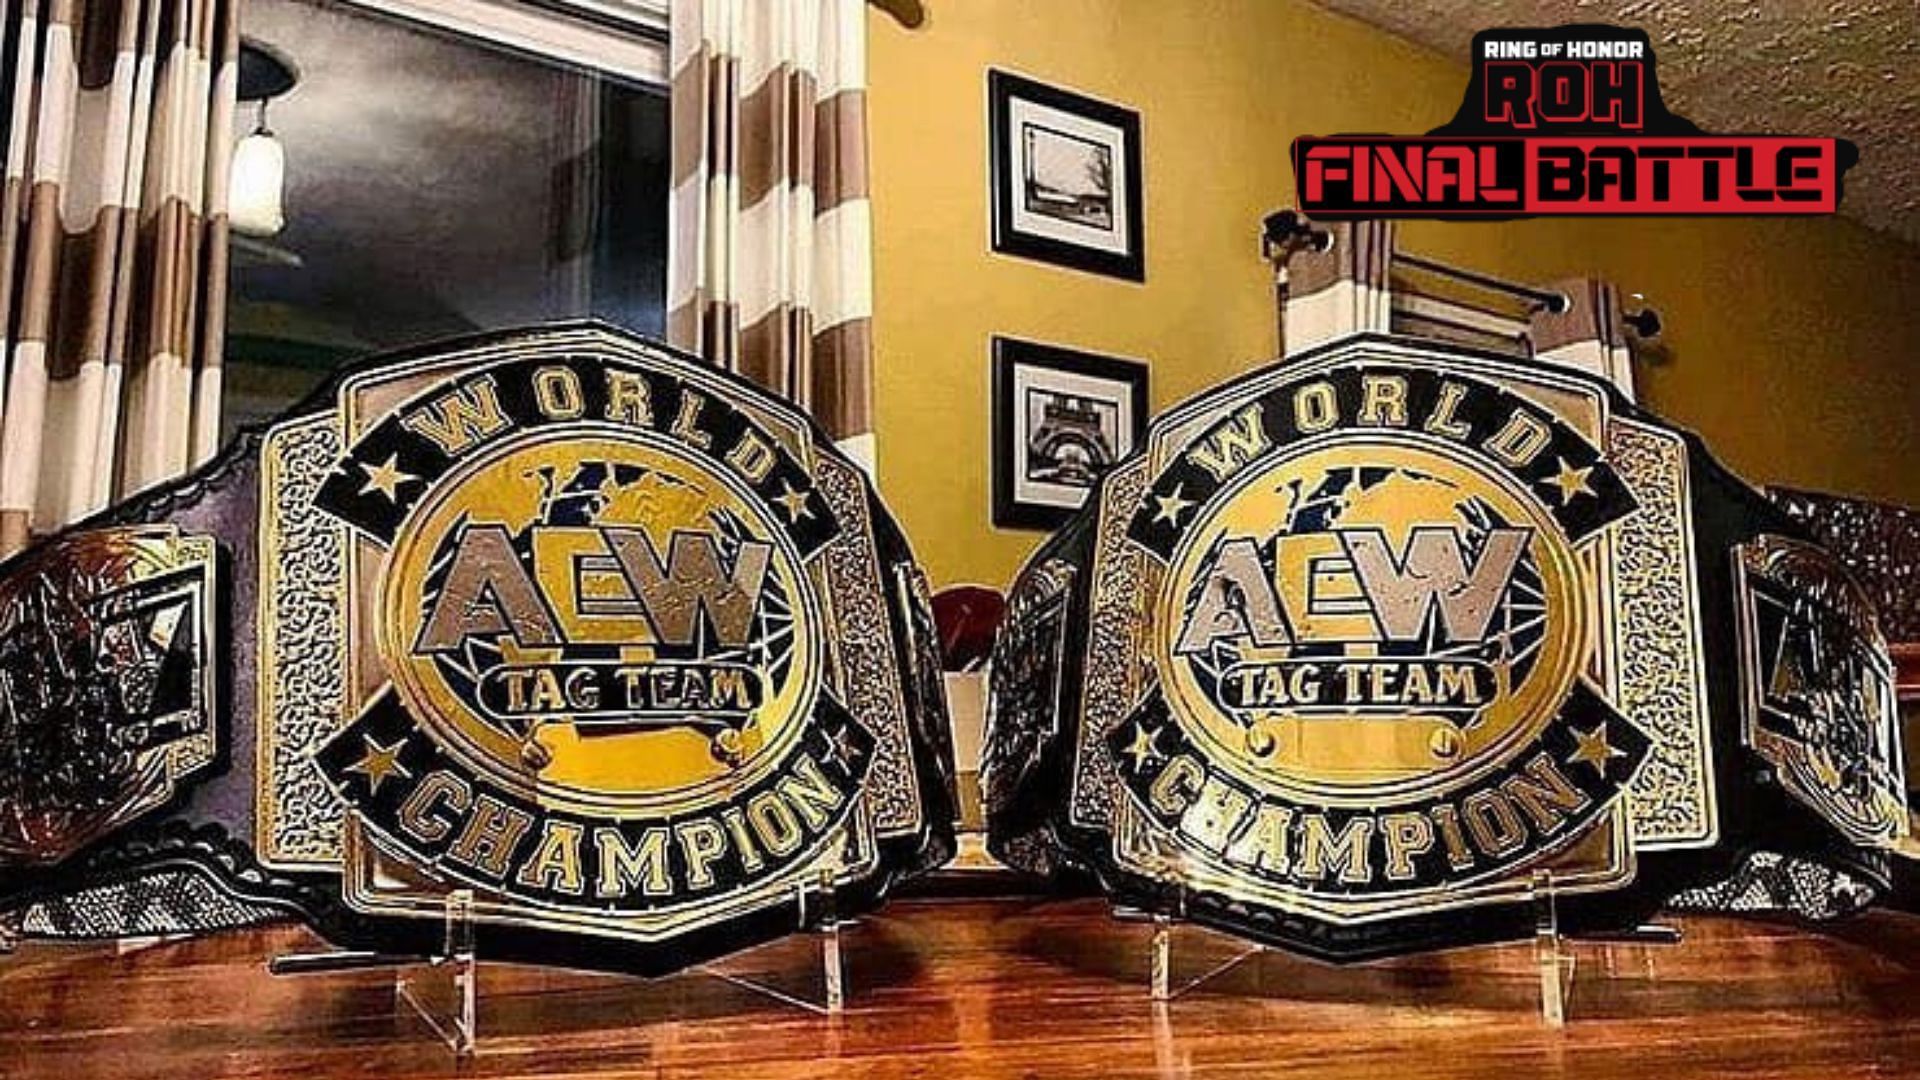 A former AEW World Tag Team seemingly split up at ROH Final Battle